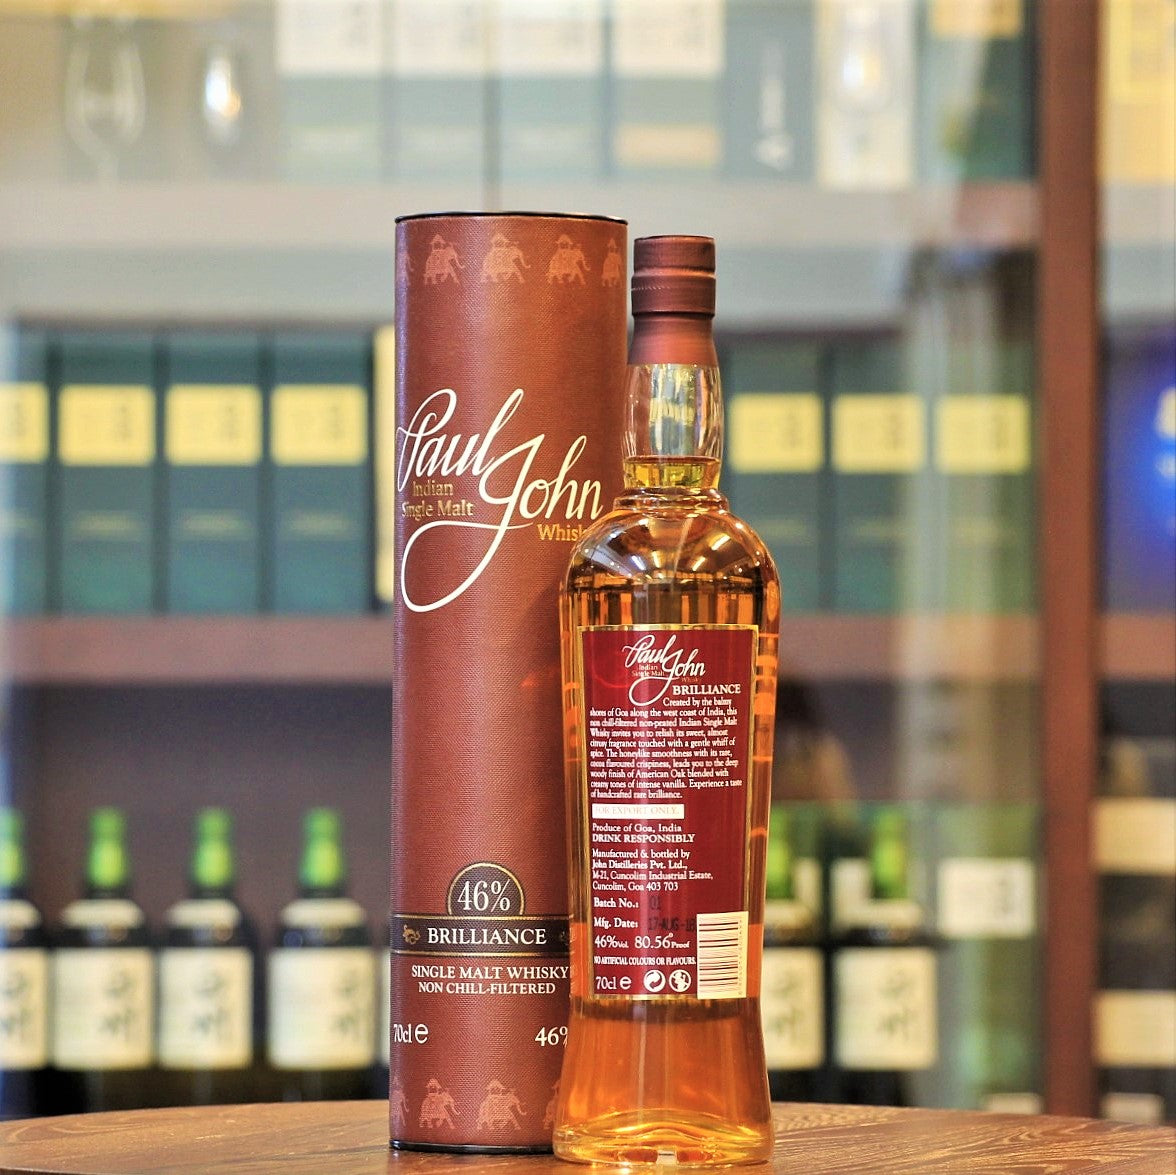 This is the Non-Peated Single Malt Whisky from the Paul John Distillery in Goa, India and forms a part of their Flagship Range consisting of Brilliance, Edited and Bold. Used the six-row barley from the Himalayas foothills and matured in bourbon casks, Brilliance gives a fruity and creamy texture. 